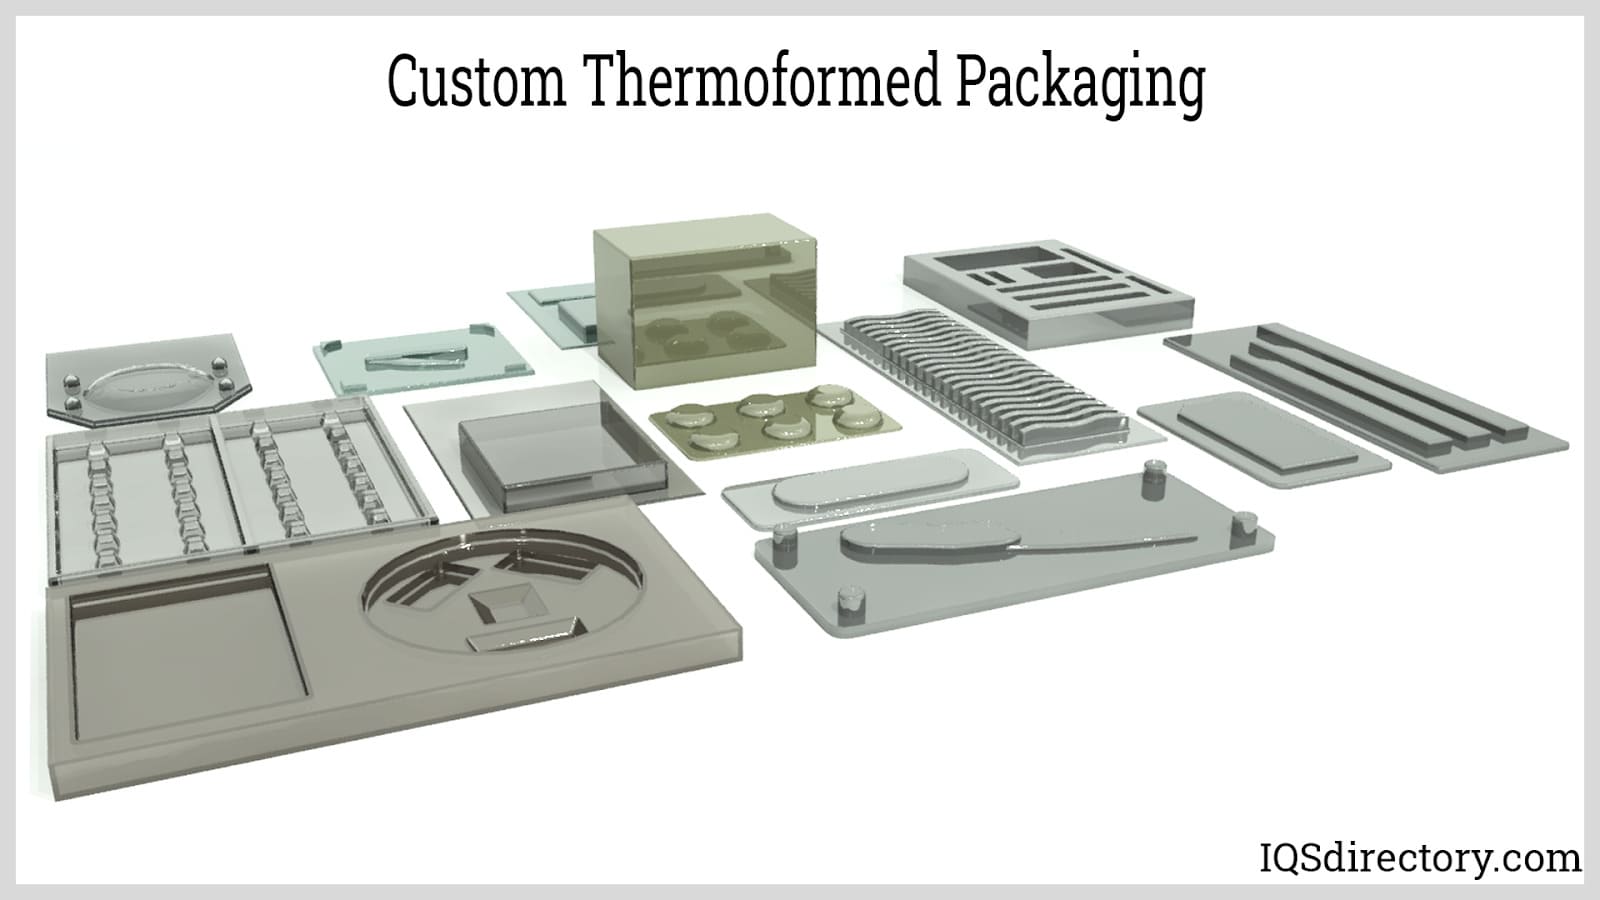 Custom Thermoformed Packaging